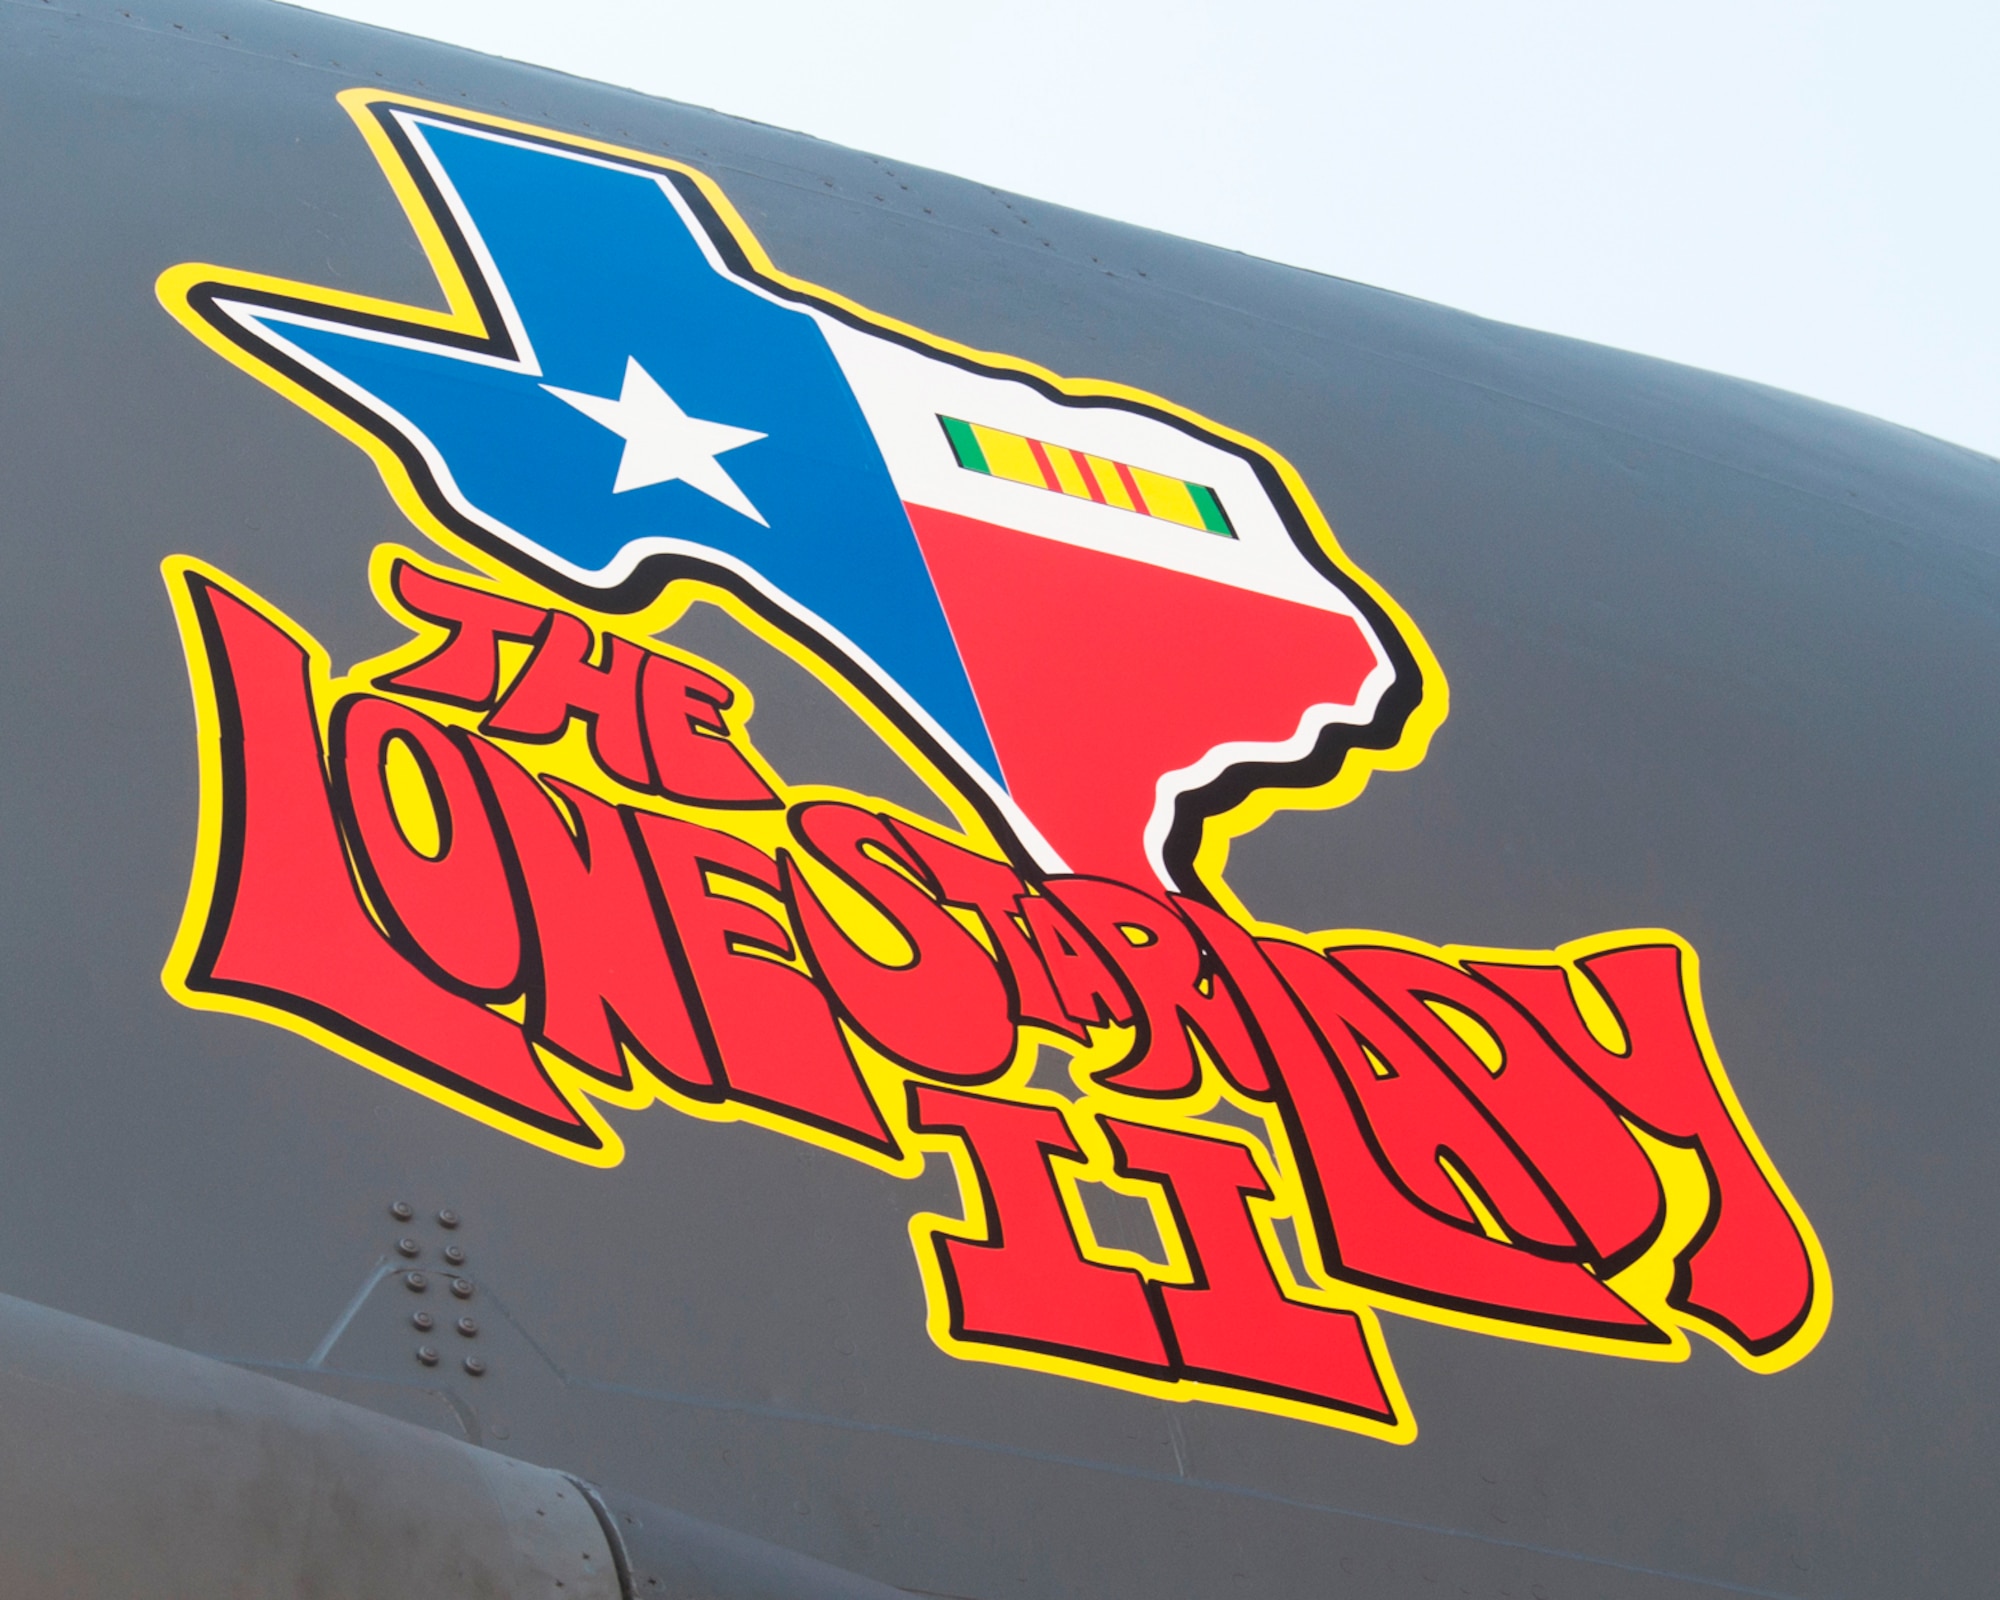 The Lone Star Lady II nose art was unveiled on a B-52 Stratafortress, on May 1, 2015 in front of a group of 307th Bomb Wing Vietnam Veteran alumni at Barksdale Air Force Base, La. The nose art commemorates the 50th anniversary of the Vietnam War and honors the veterans that served during that time. The original Lone Star Lady flew in the Linebacker II bombing raid in 1972 against targets in North Vietnam. She was operated by the 7th Bomb Wing at Carswell AFB, Texas, withdrawn from service on November 5, 1982 and is on display at Pima Air & Space Museum, adjacent to Davis-Monthan AFB, Ariz. (U.S. Air Force photo by Tech. Sgt. Ted Daigle)